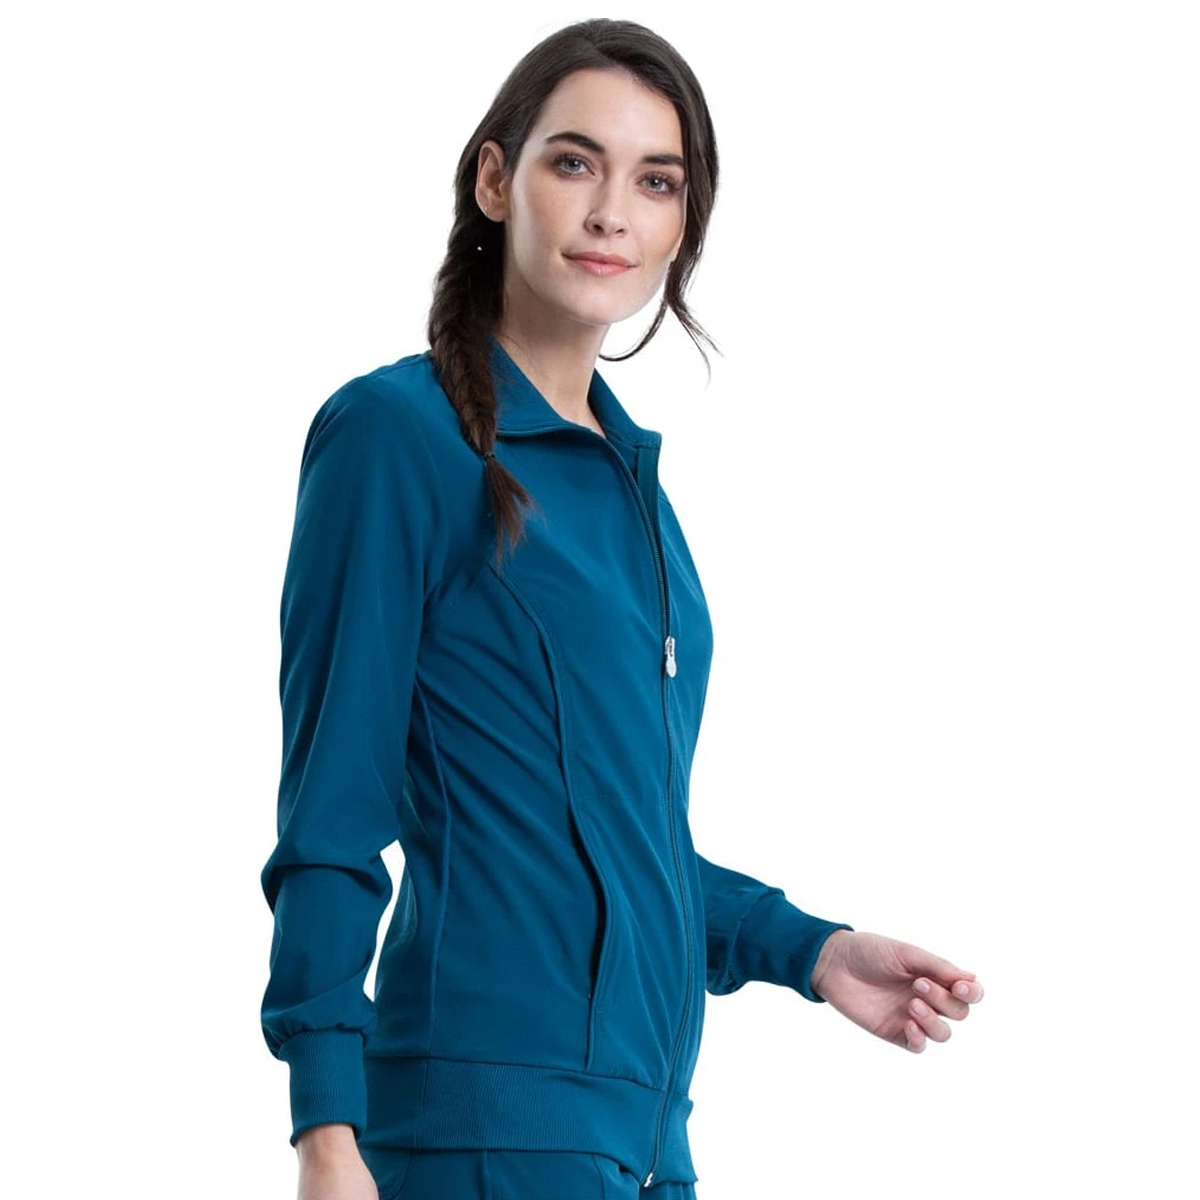 https://www.2heartsmedical.com/wp-content/uploads/2021/09/Infinity-by-Cherokee-Womens-Zip-Front-Warm-Up-Solid-Scrub-Jacket-CH2391A-5.jpg